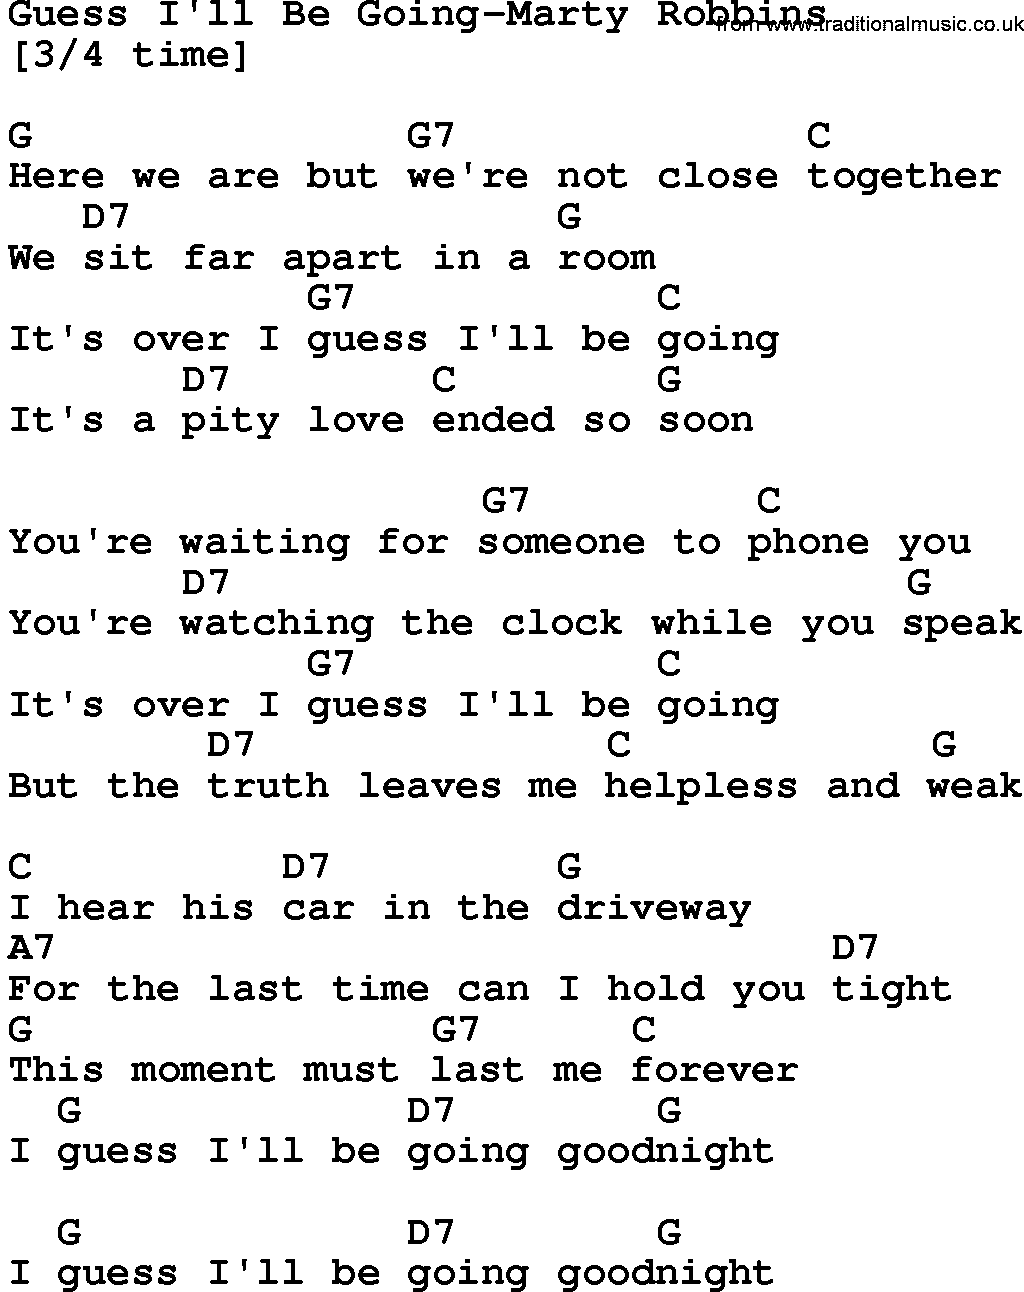 Country music song: Guess I'll Be Going-Marty Robbins lyrics and chords